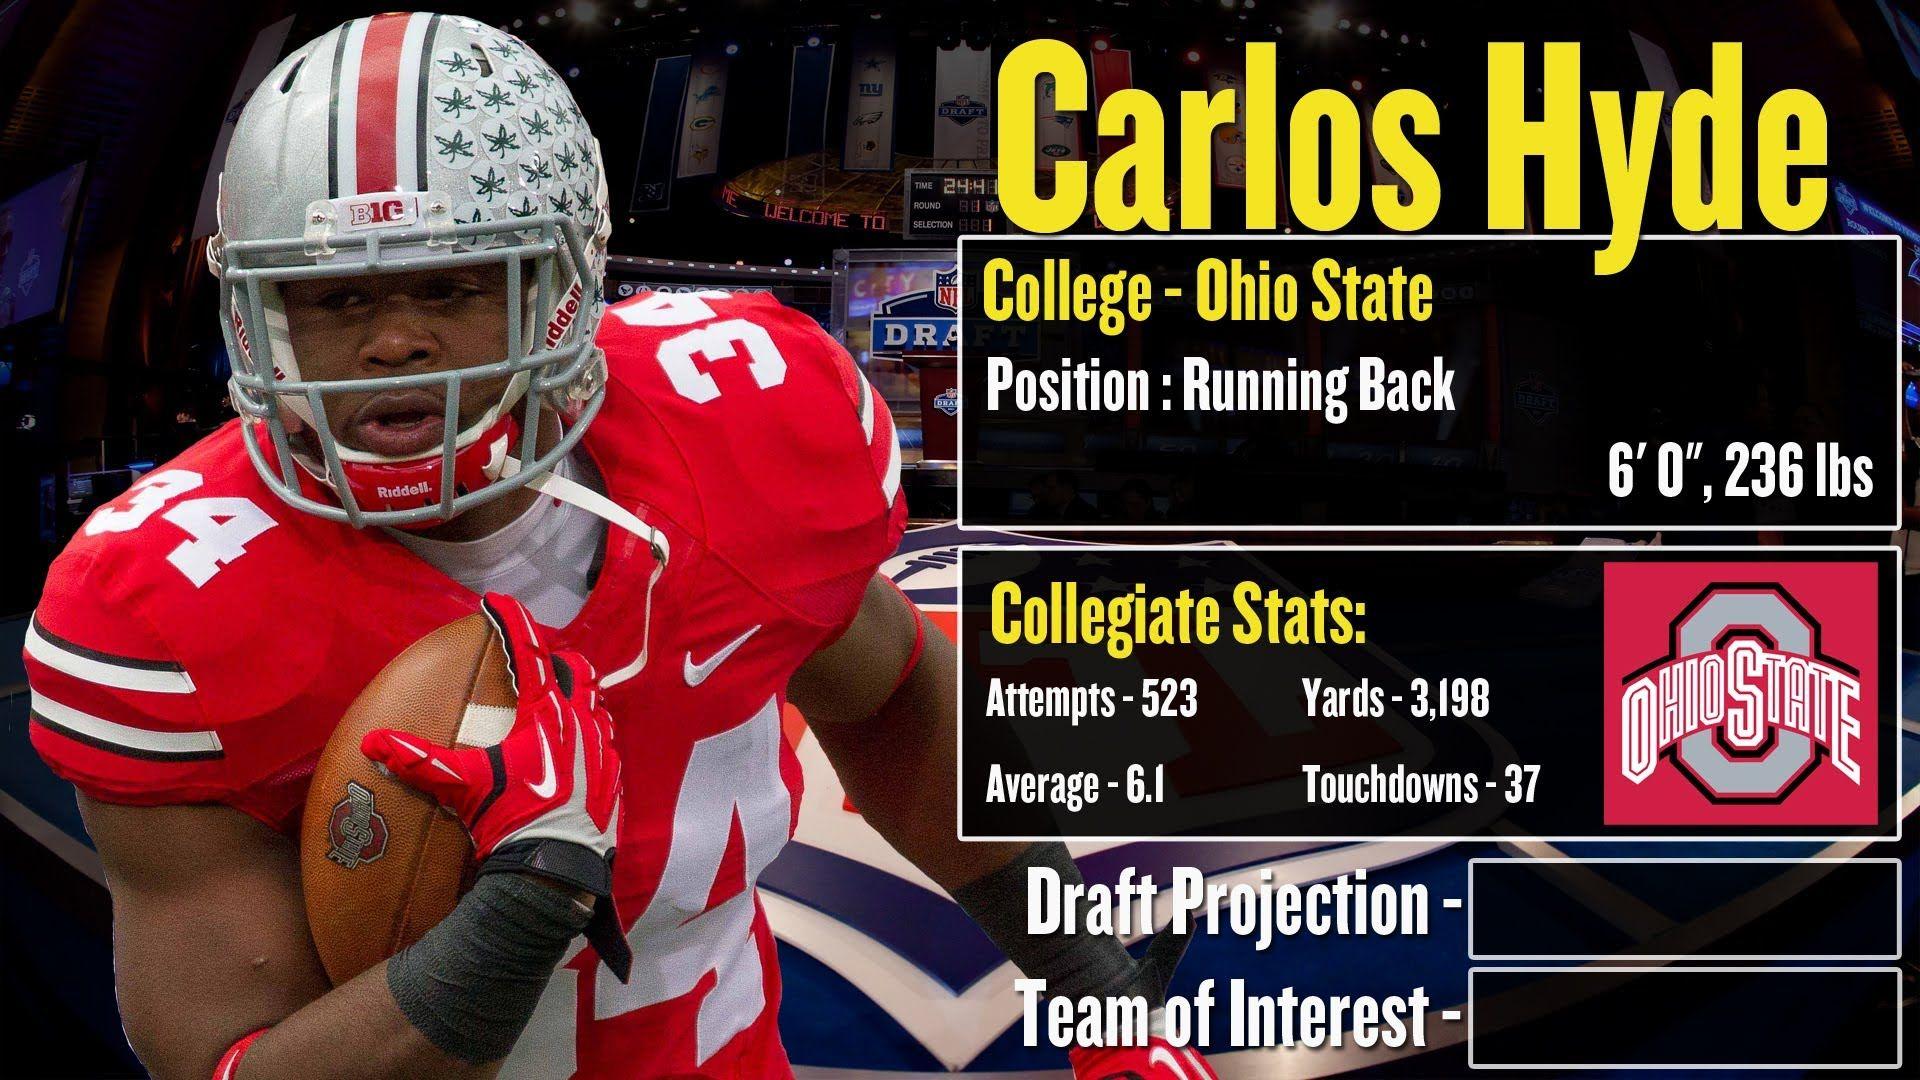 NFL Draft Profile: Carlos Hyde and Weaknesses +